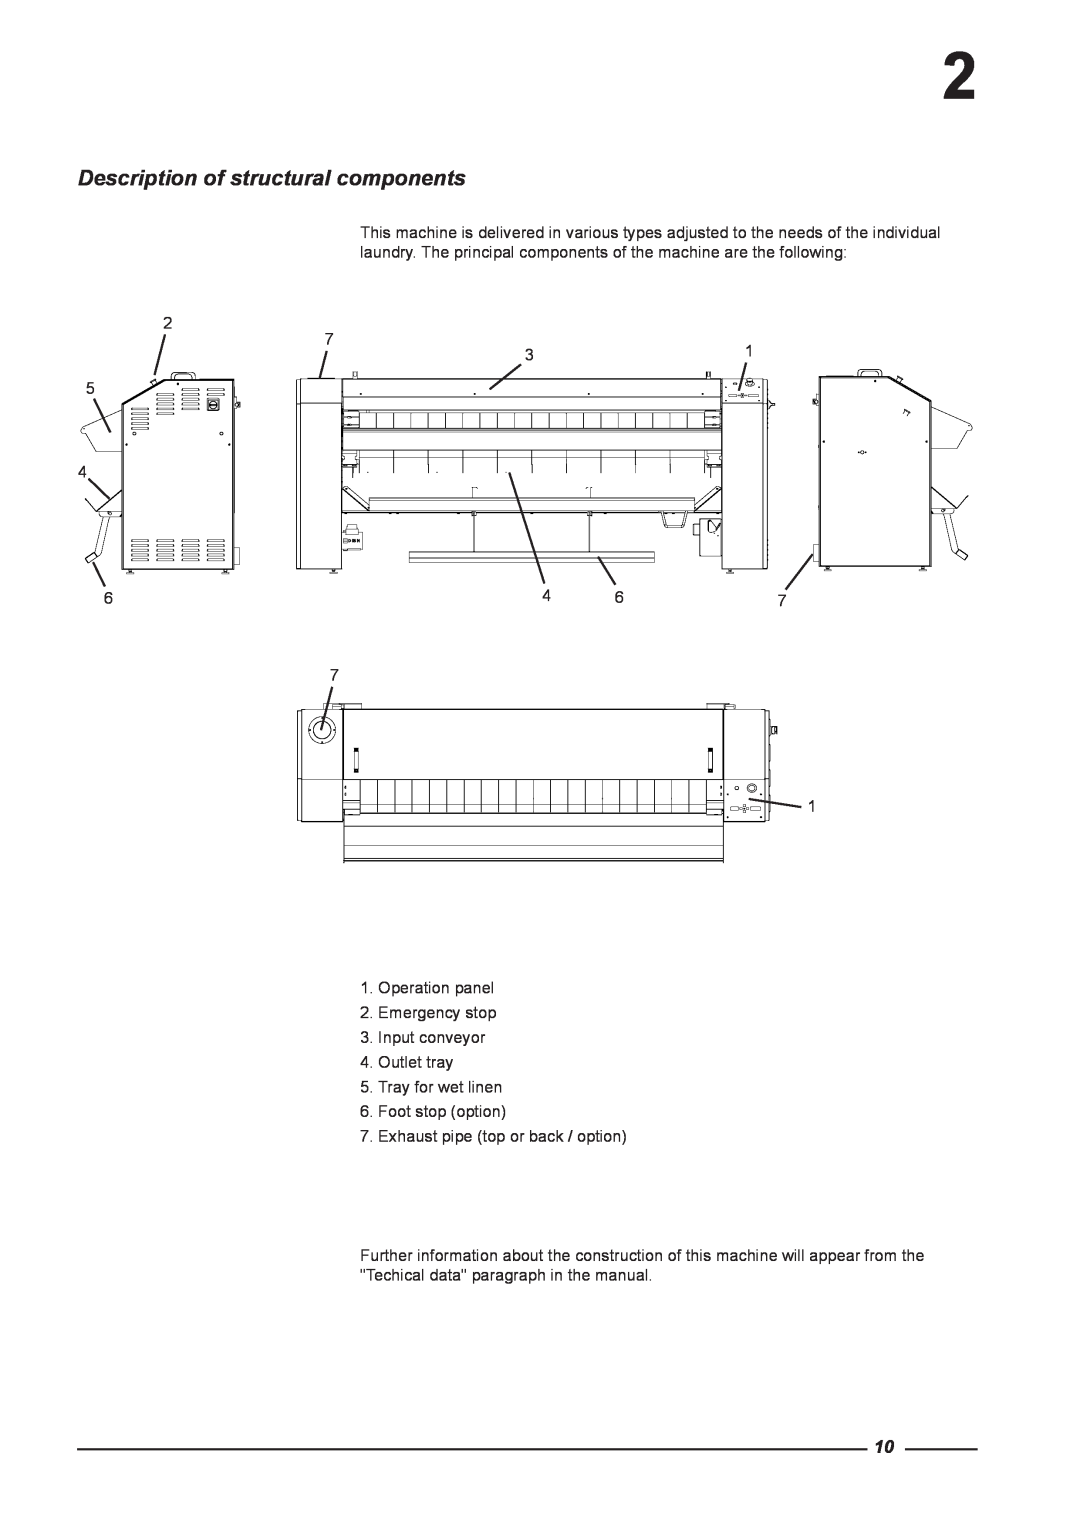 Alliance Laundry Systems CI 1650/325, CI 2050/325 instruction manual Description of structural components 